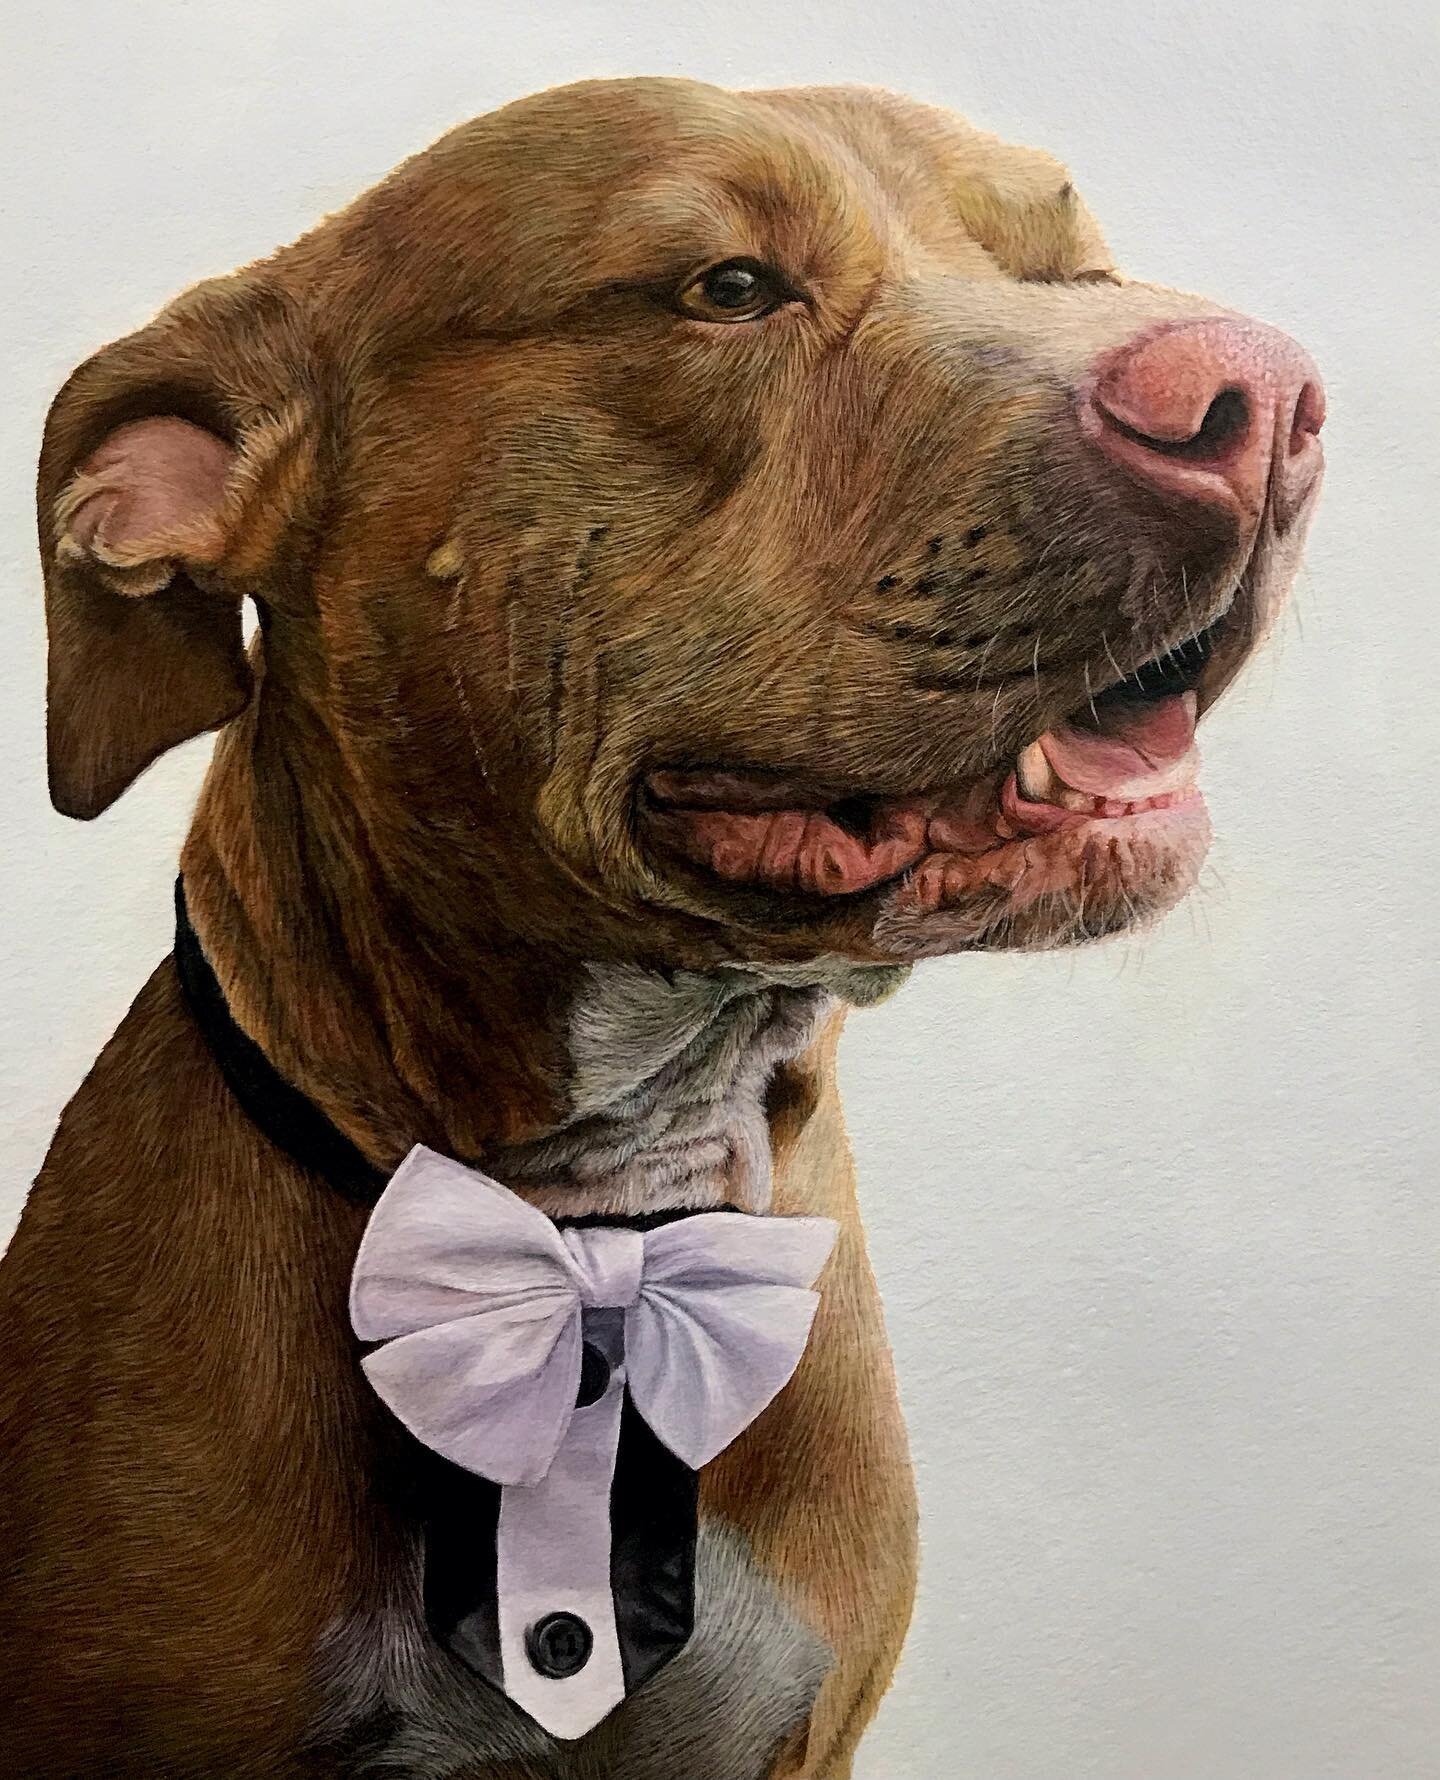 Meet &lsquo;Pablo&rsquo; the very handsome American pink nosed Pit bull 🐶 - 8x10&rdquo; Acrylic 
So many colours went into this painting and he has definitely turned out as one of my favourites! 
He is the second painting being shipped along with &l